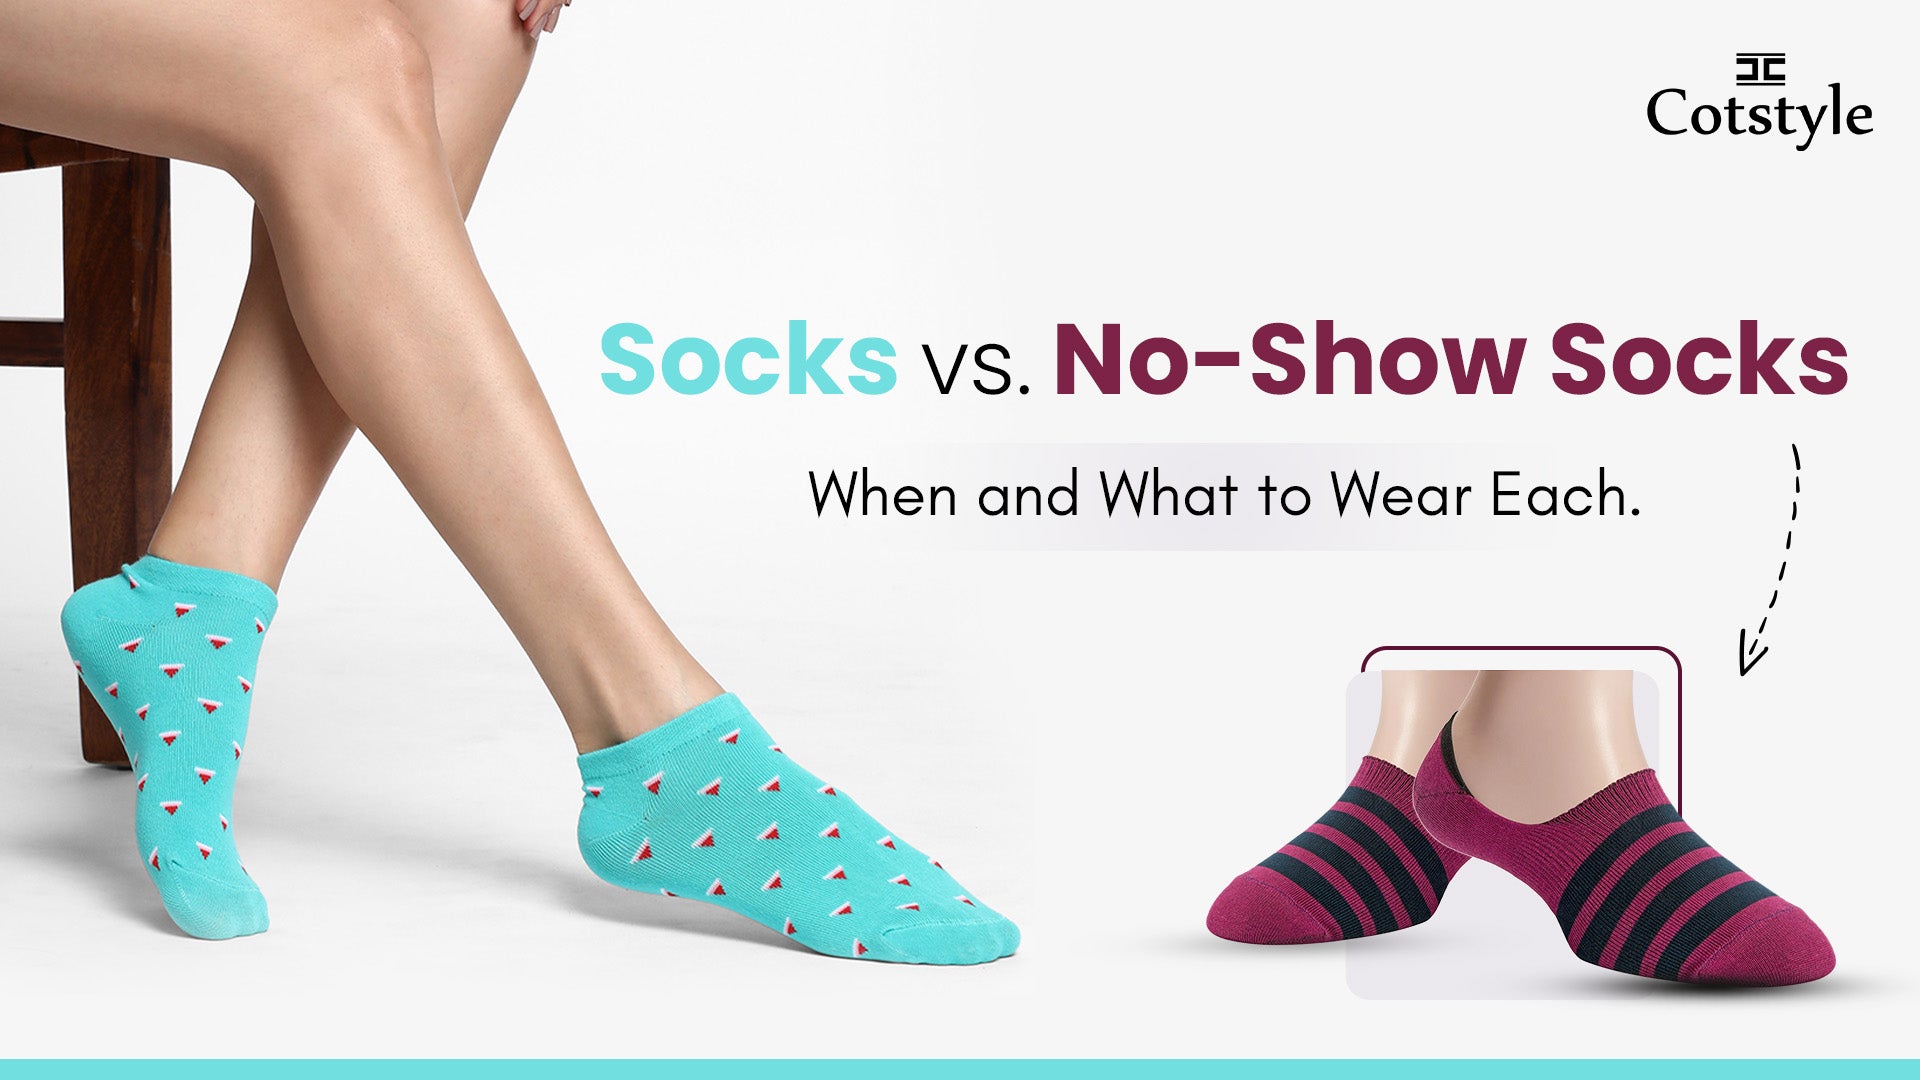 Socks vs. No-Show Socks: When and What to Wear Each